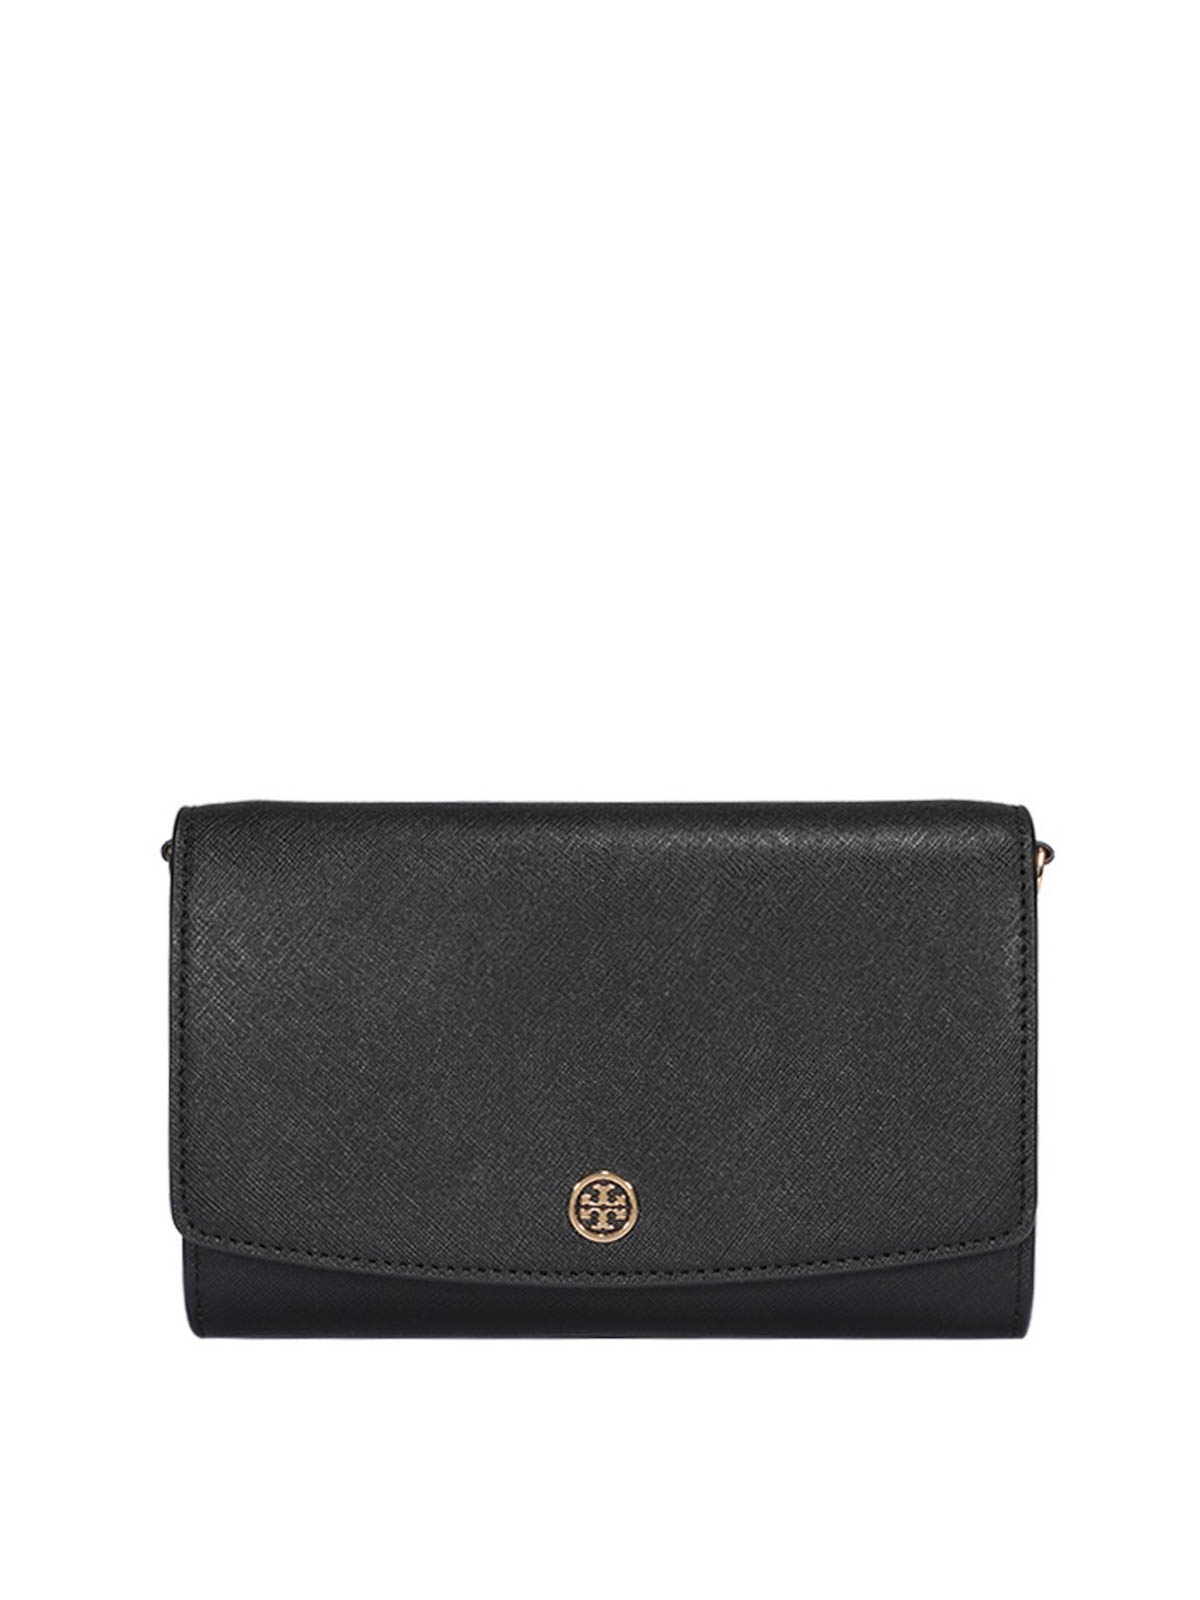 Tory Burch Robinson Chain Wallet in White